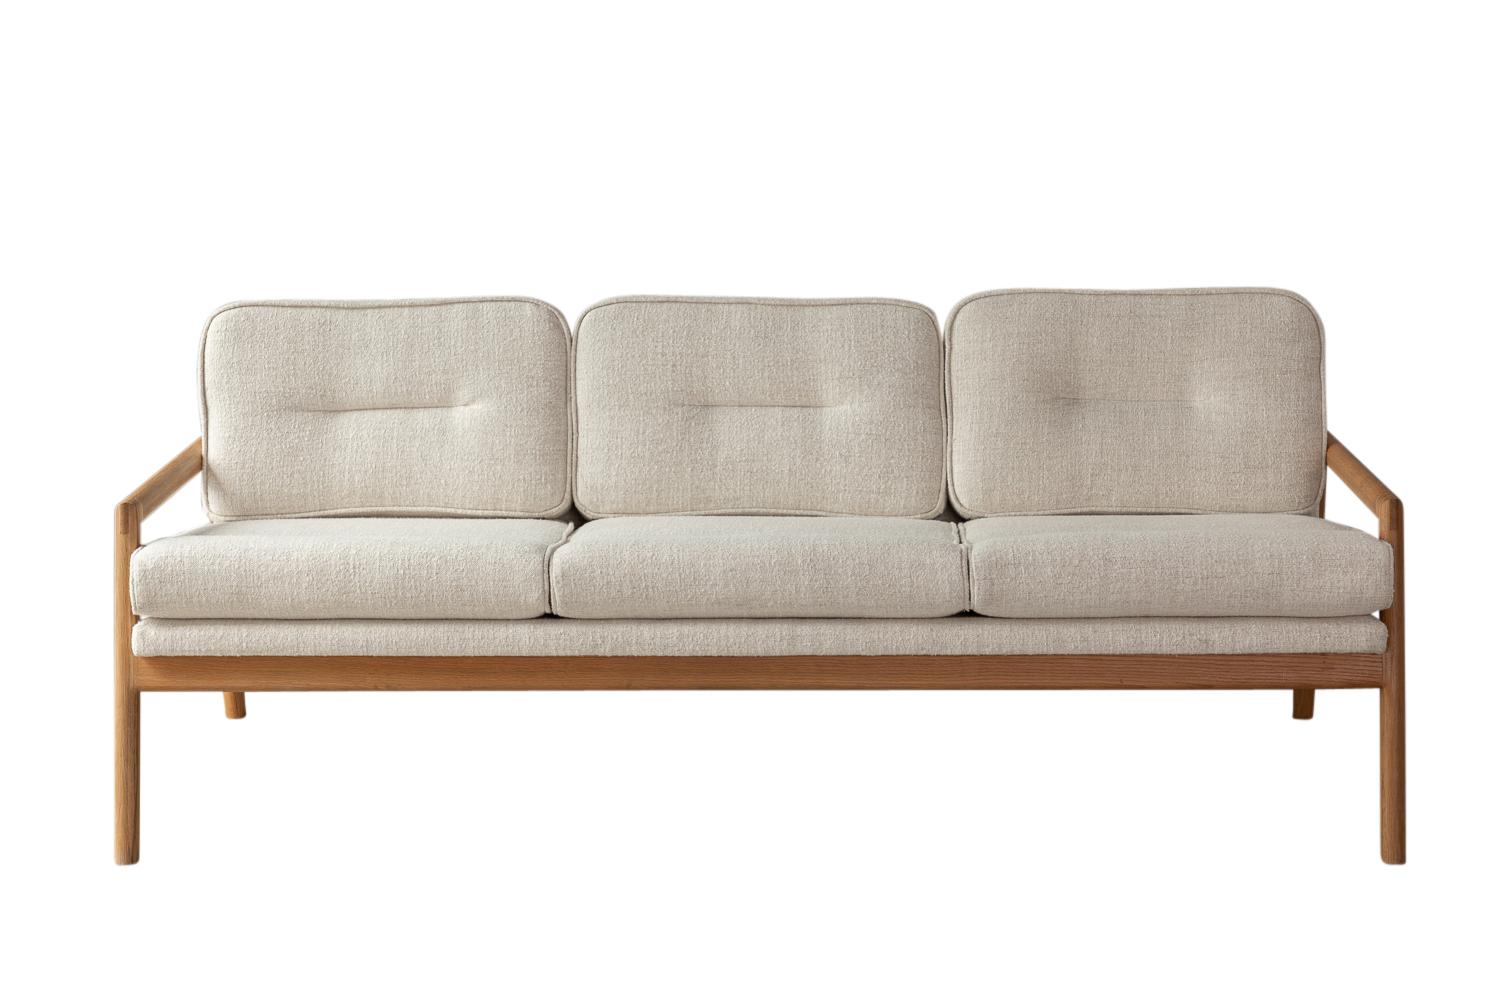 American Handcrafted White Oak Moresby Sofa with Custom Linen or Leather Upholstery For Sale